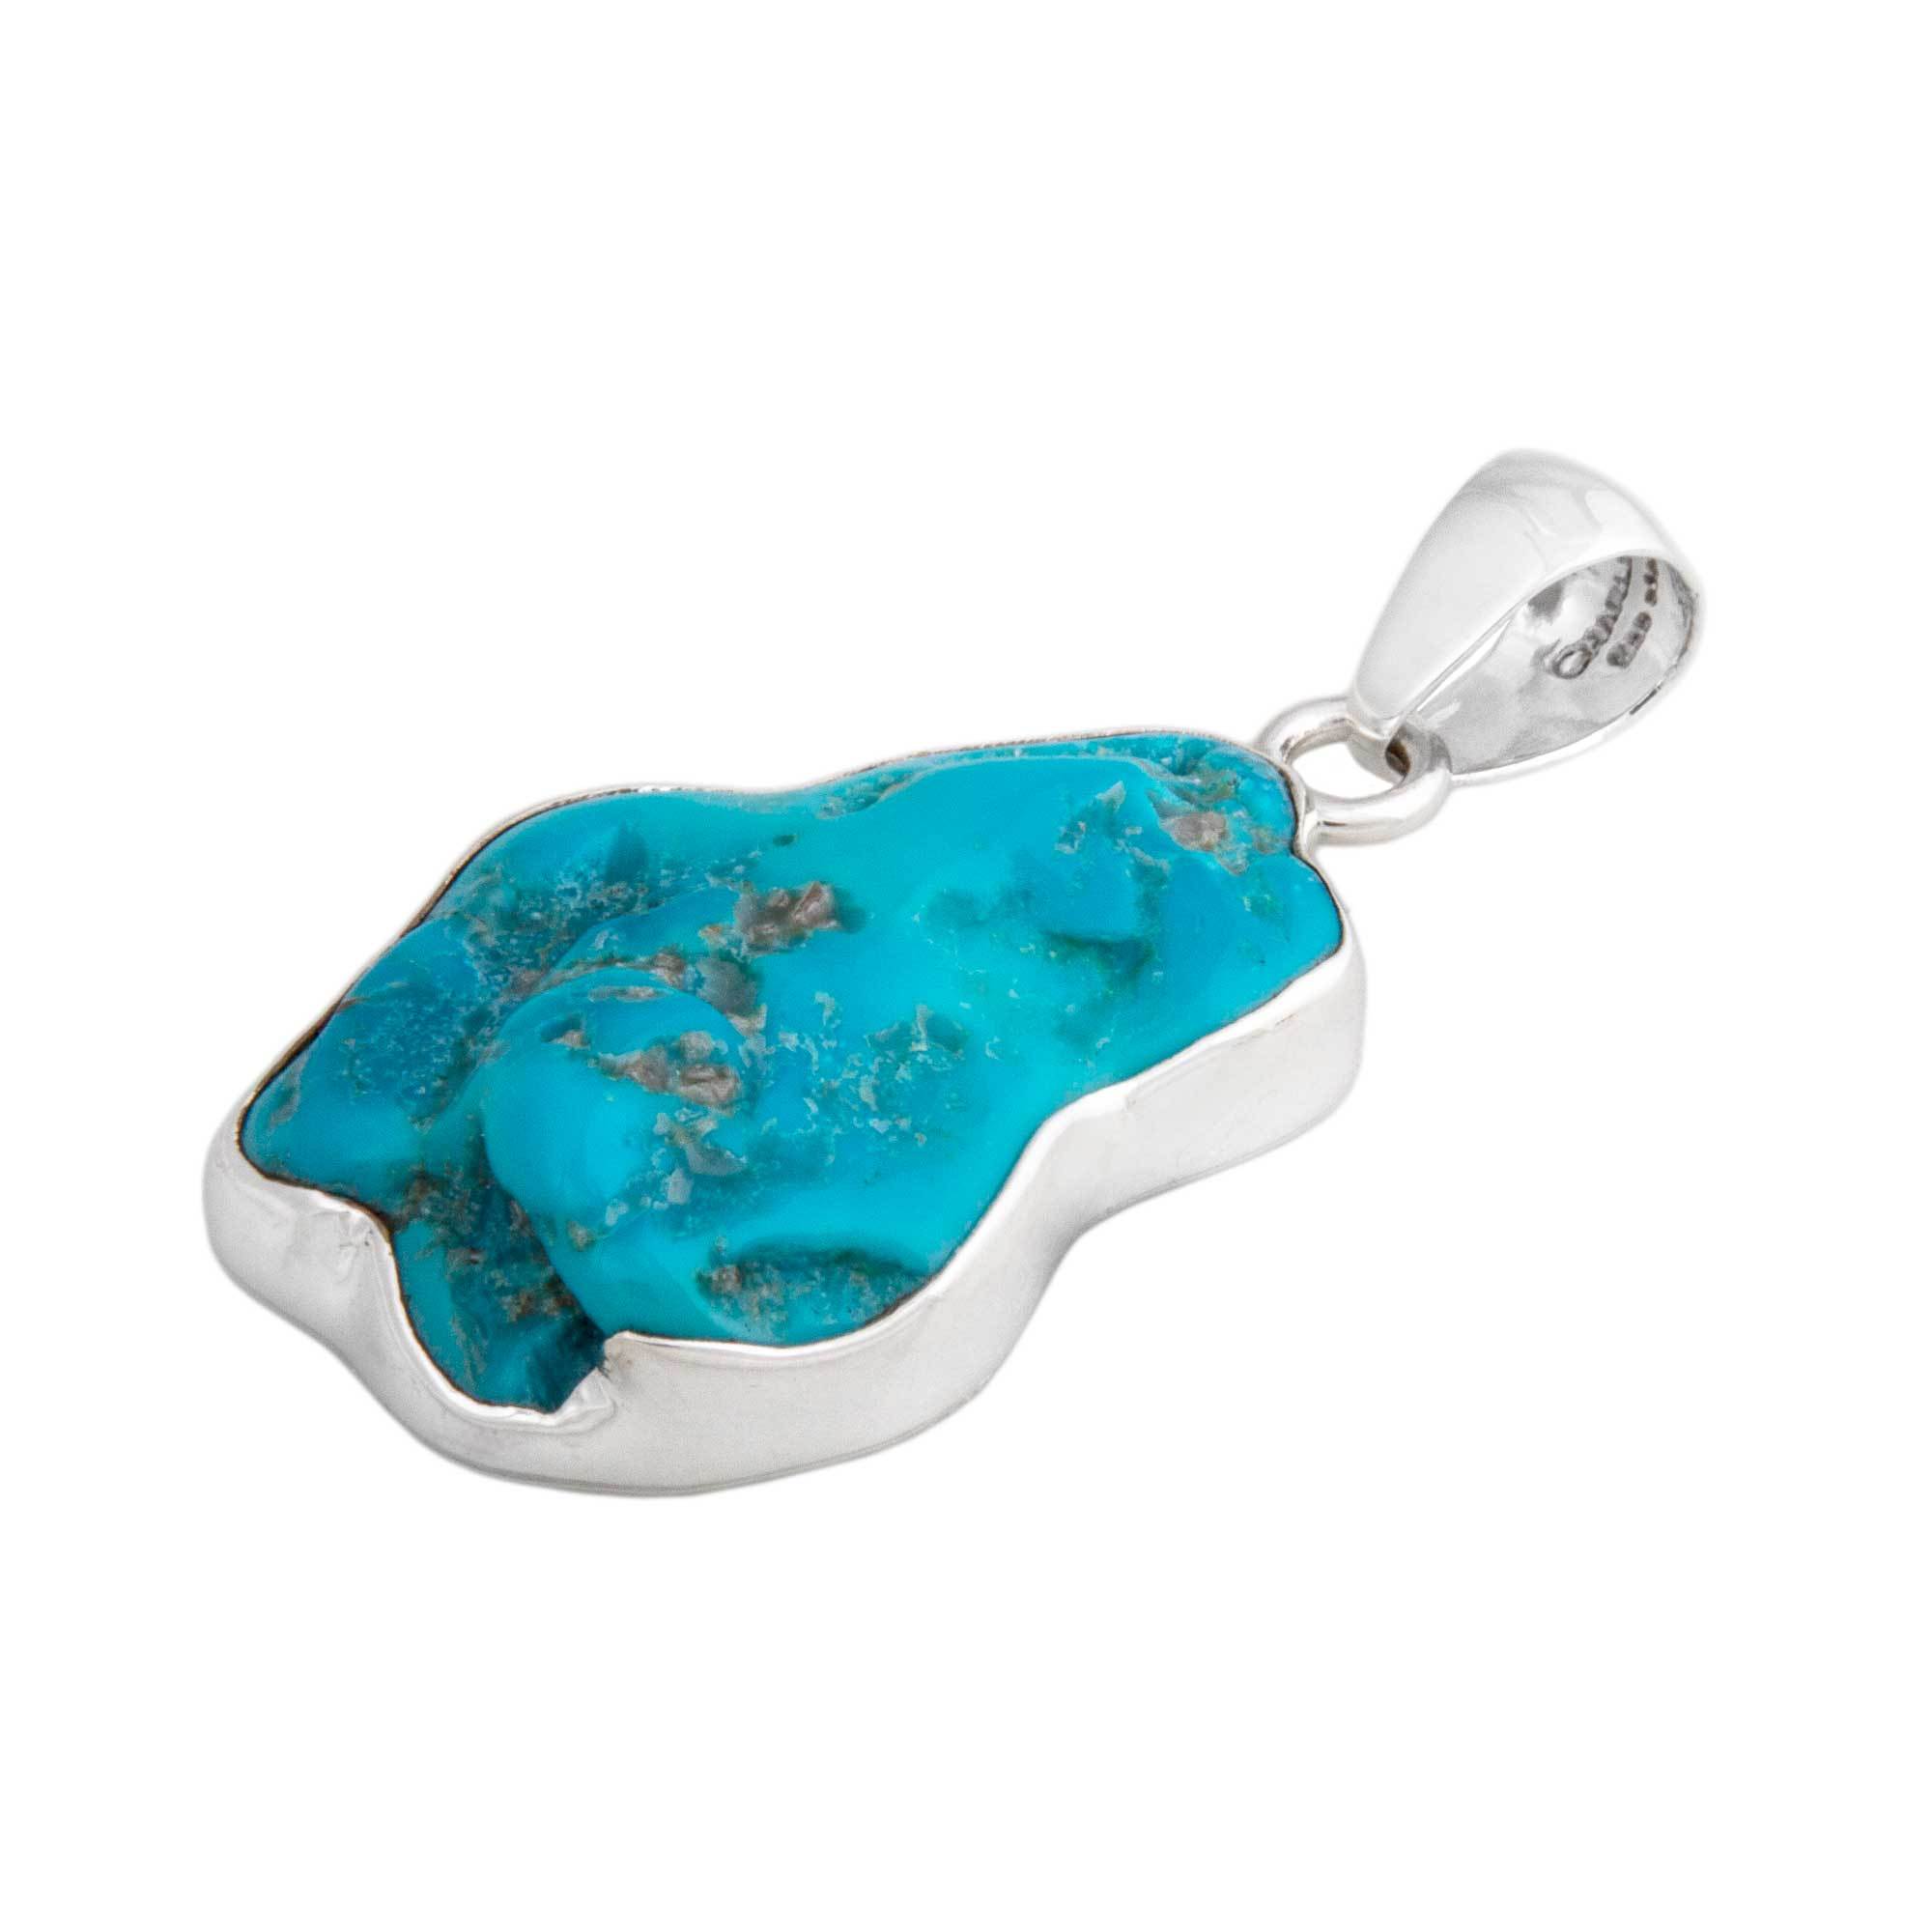 Sterling Silver Sleeping Beauty Turquoise Pendant | Charles Albert Jewelry